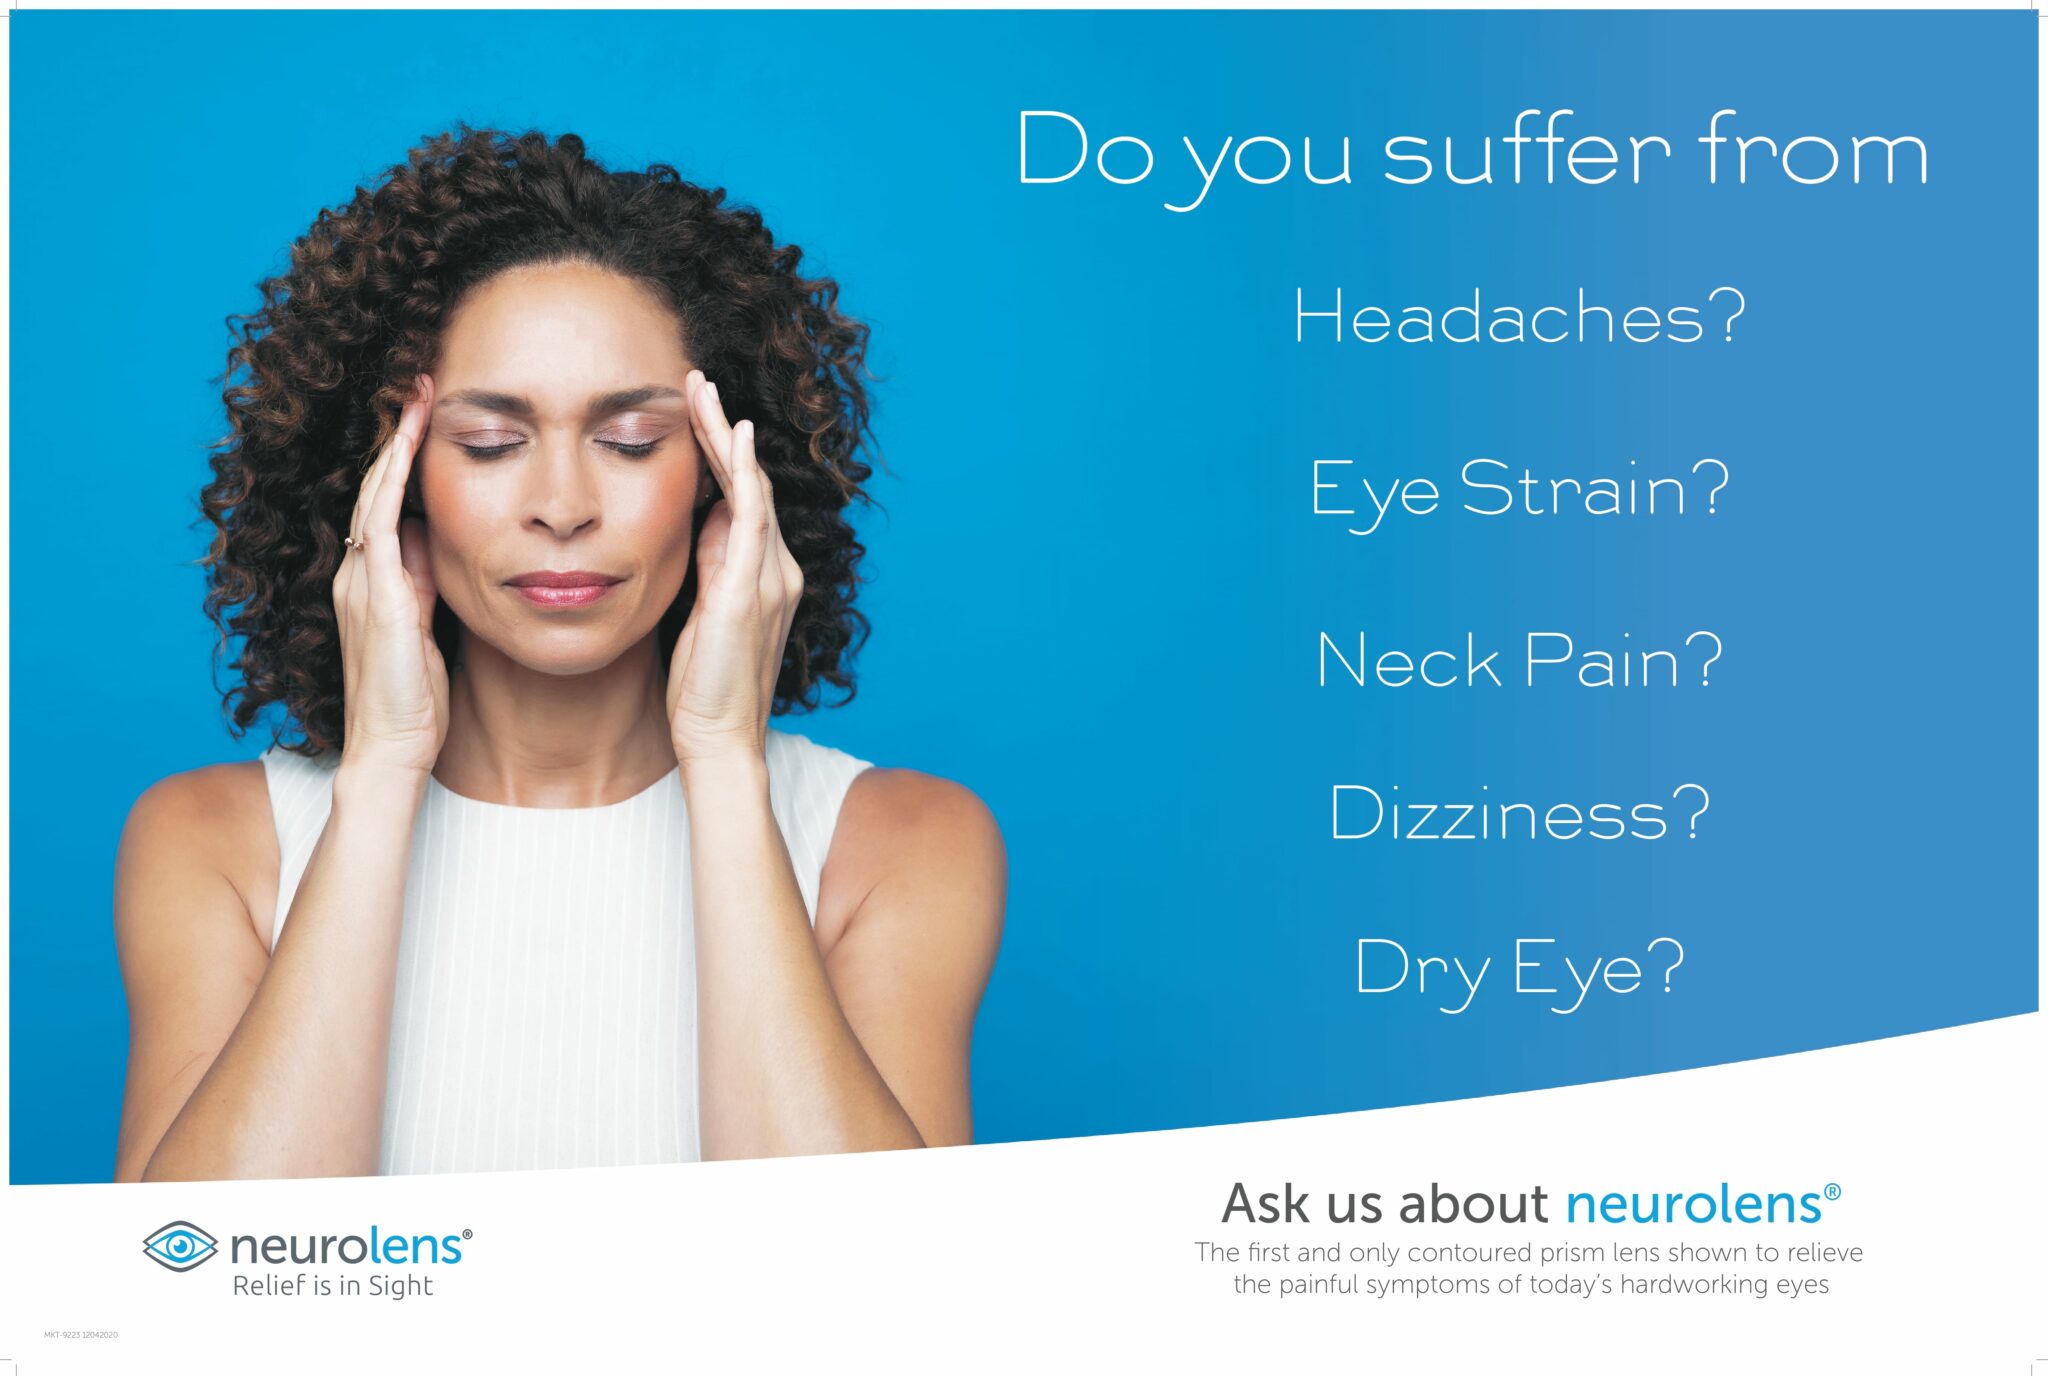 Do you suffer from Headaches? Eye strain? Neck pain? Dizziness? Dry eye? Ask us about neurolens, the first and only contoured prism lens shown to relieve the painful symptoms of today's hardworking eyes.